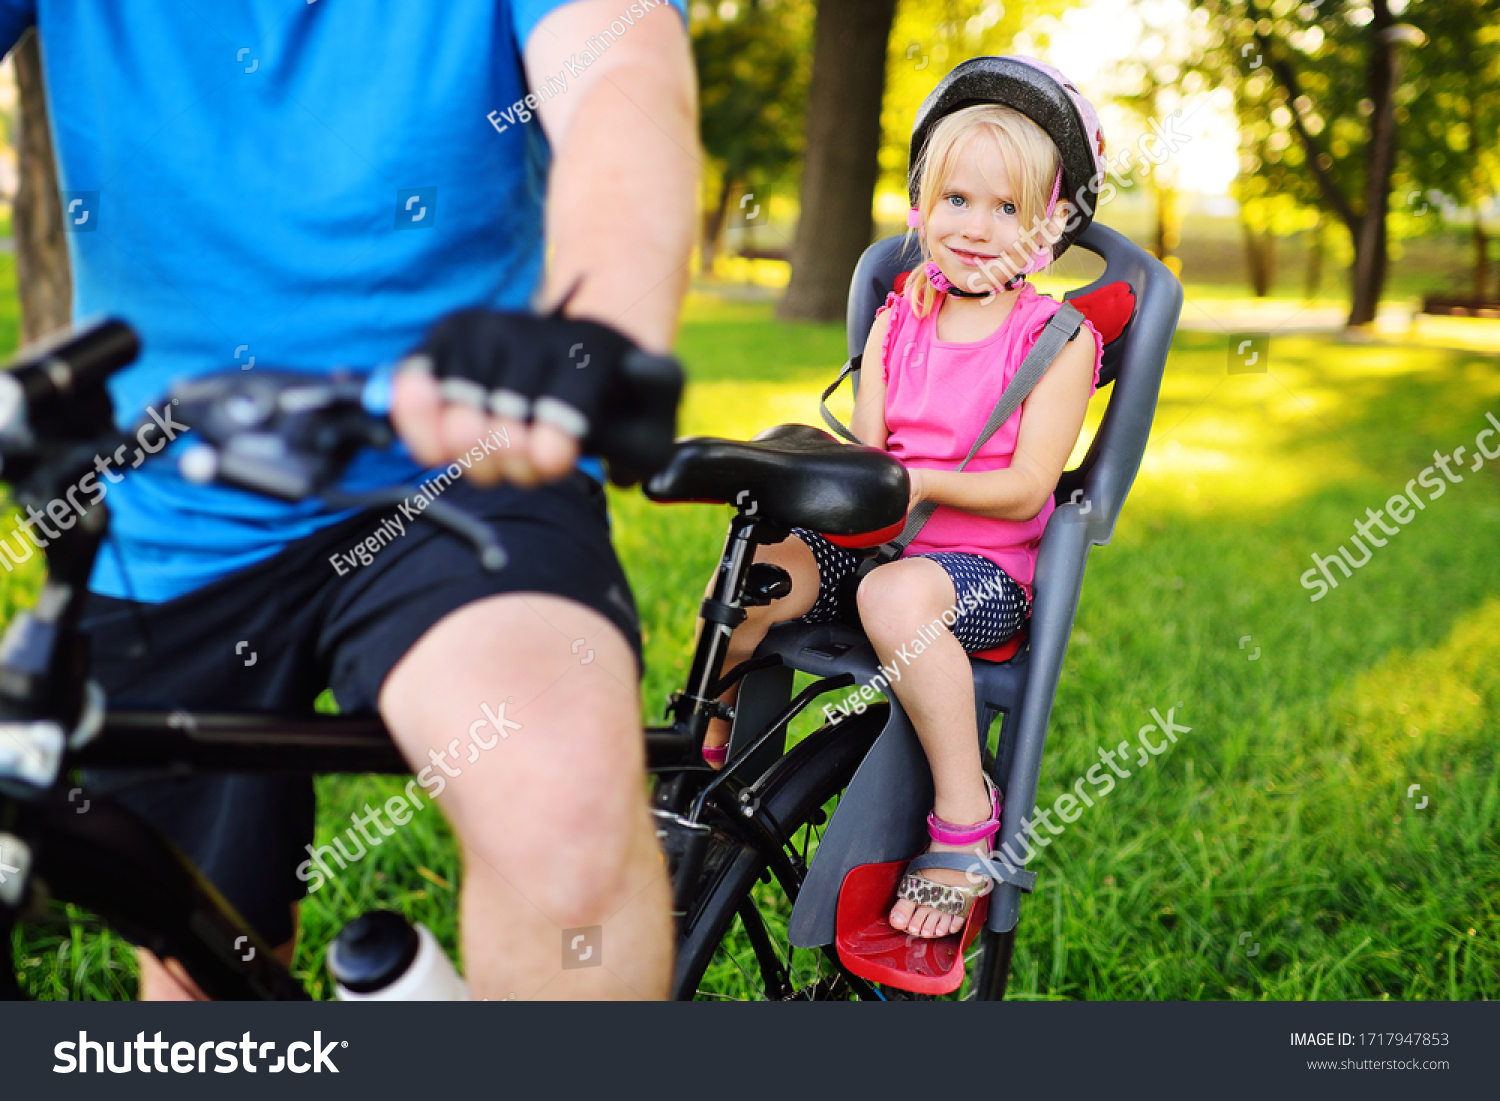 child a little girl in a Bicycle helmet smiles sitting in a child's Bicycle seat against the background of a Park and green grass. #1717947853